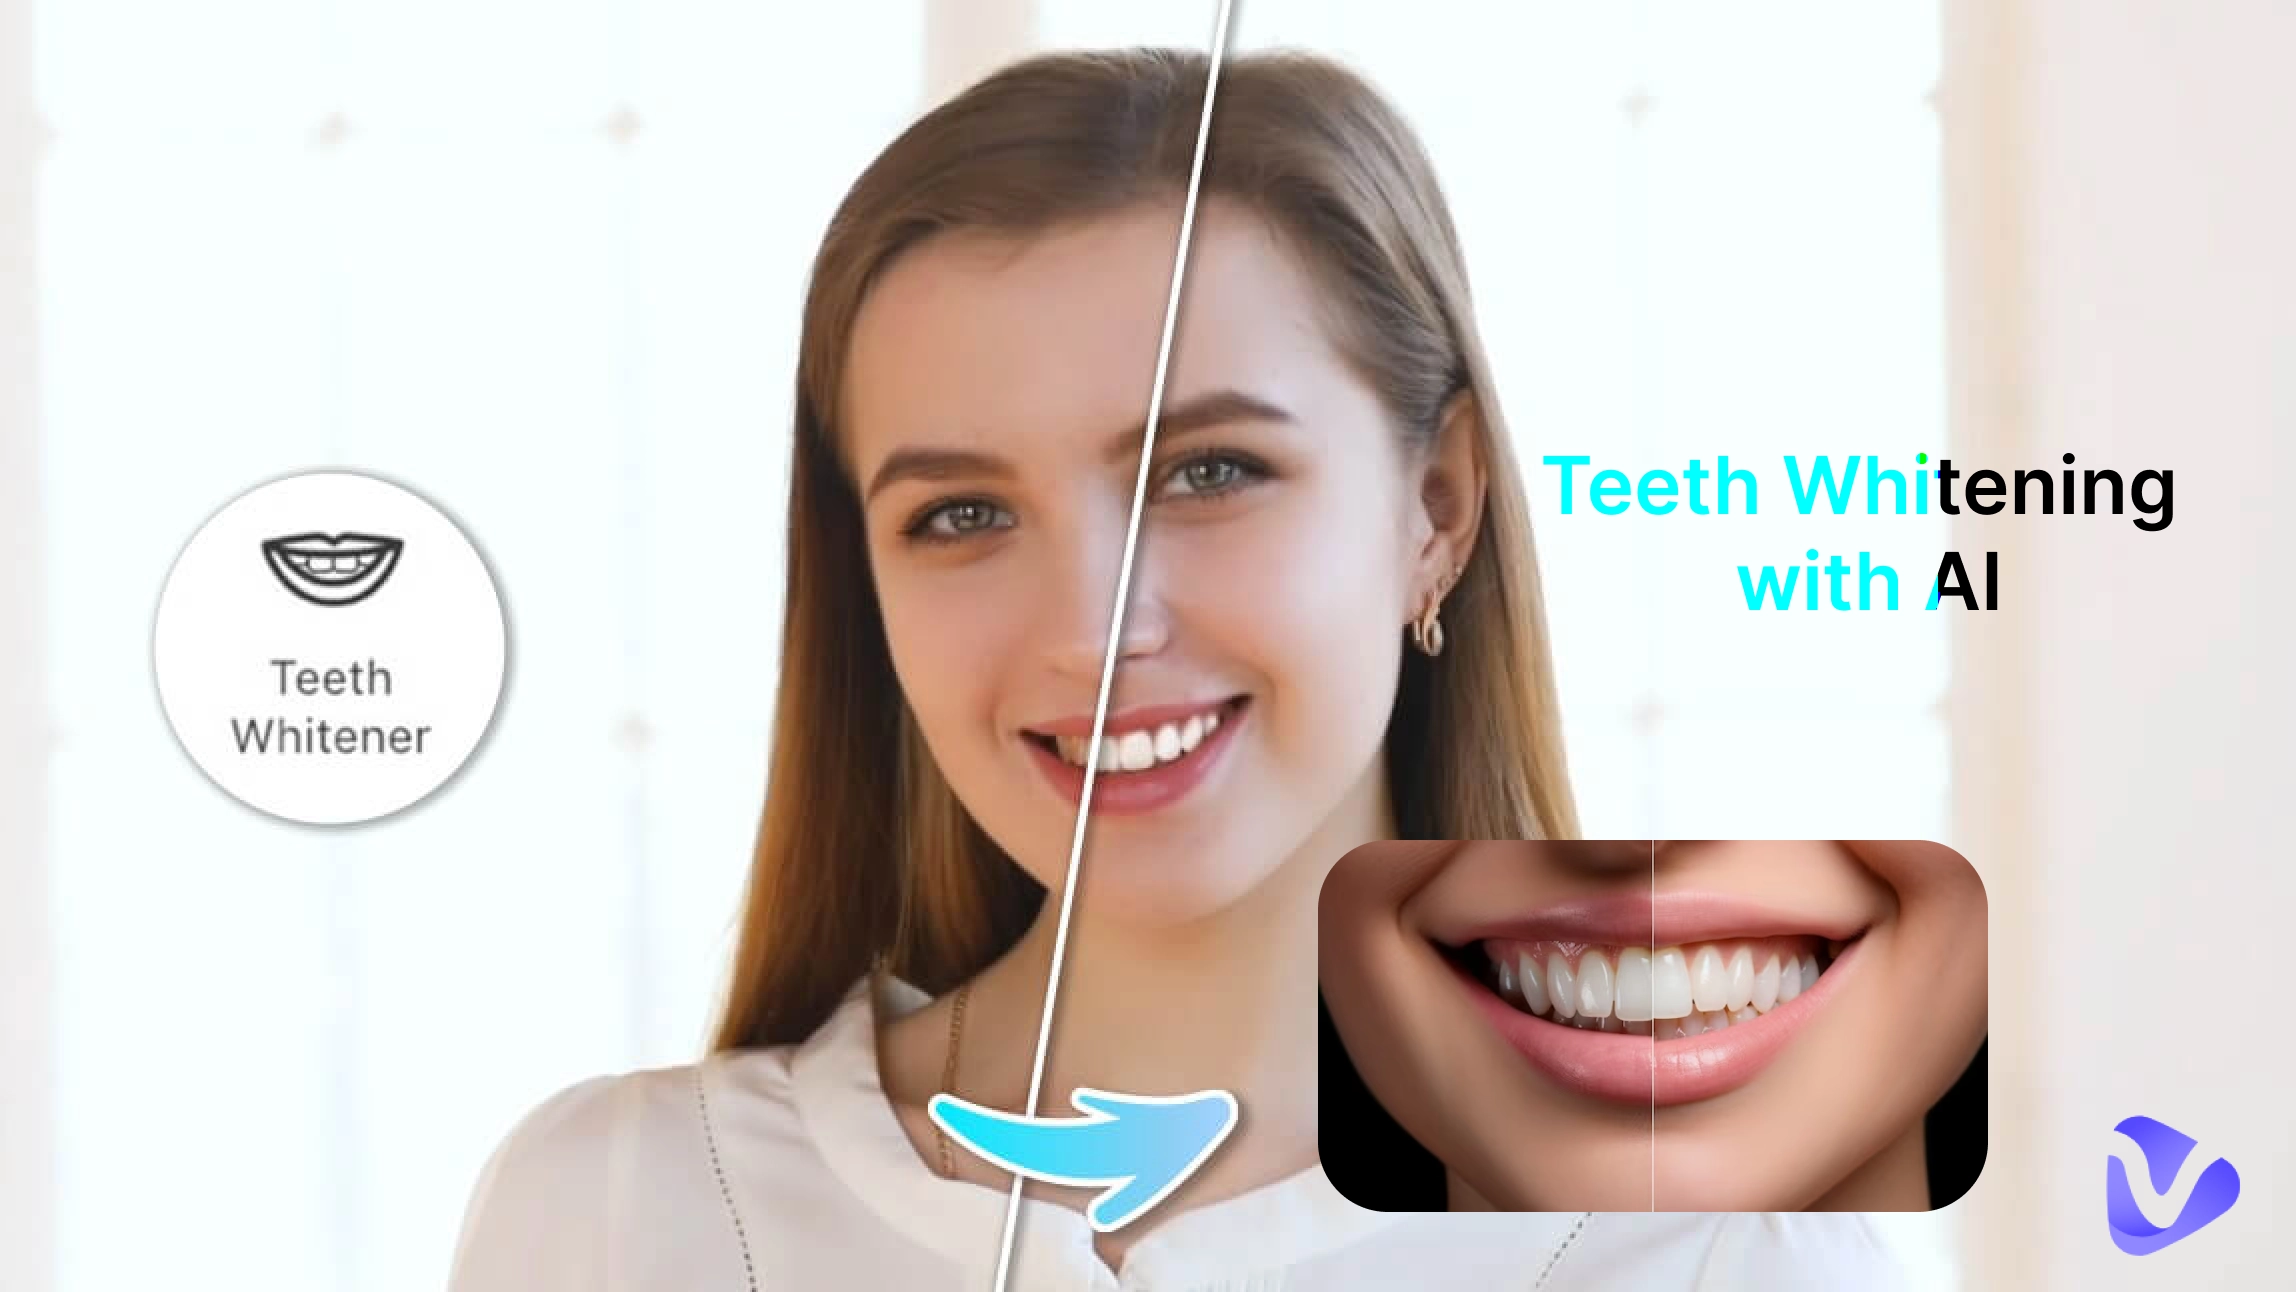 14 Apps & Tools for Teeth Whitening on Pictures on Mobile/Win/Mac/Online